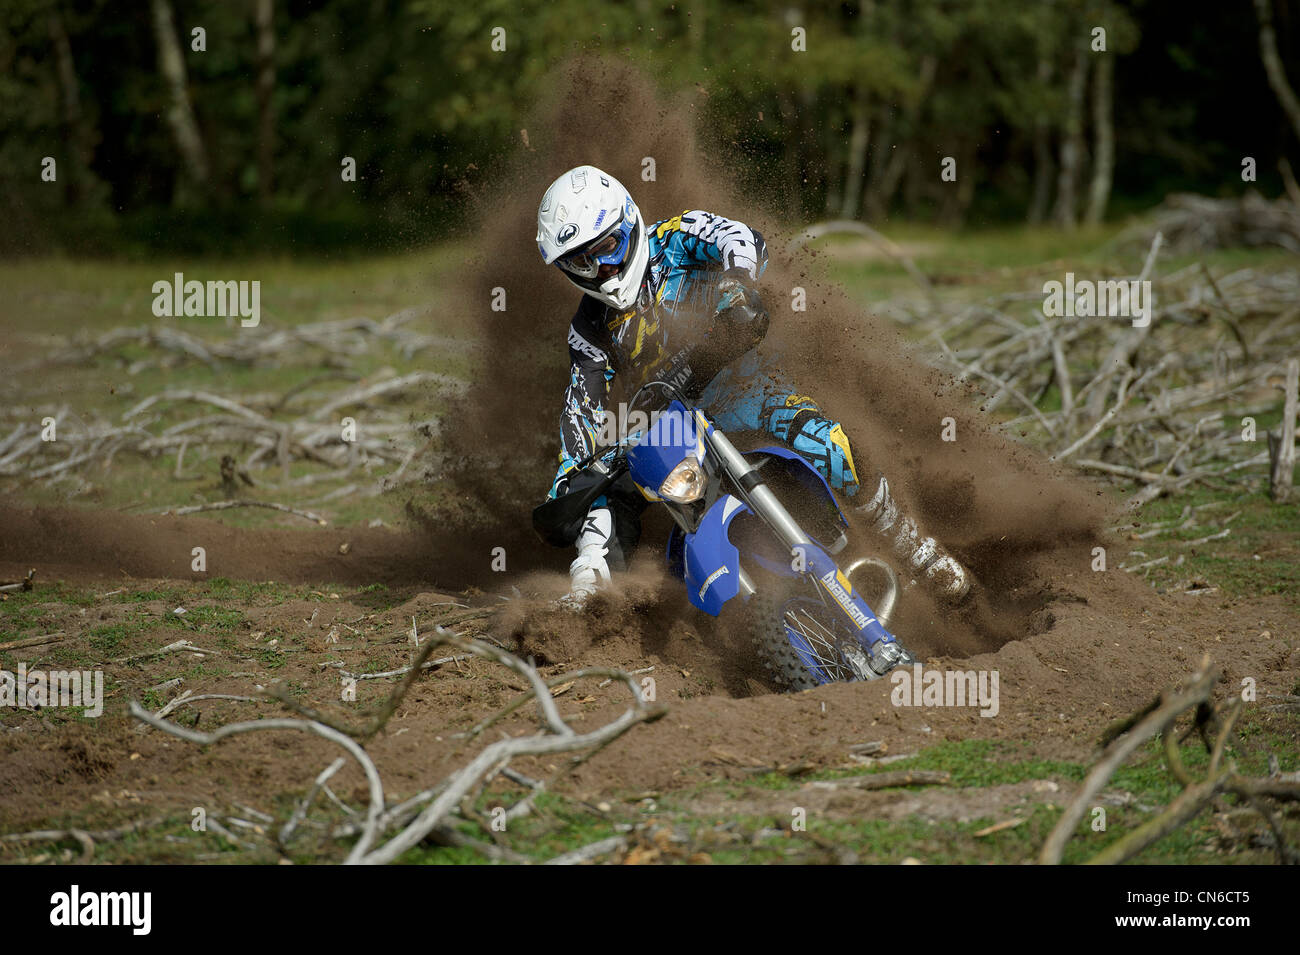 motocross racer rider riding around corner throwing up lots of roost and dirt in the air behind the motorbike Stock Photo